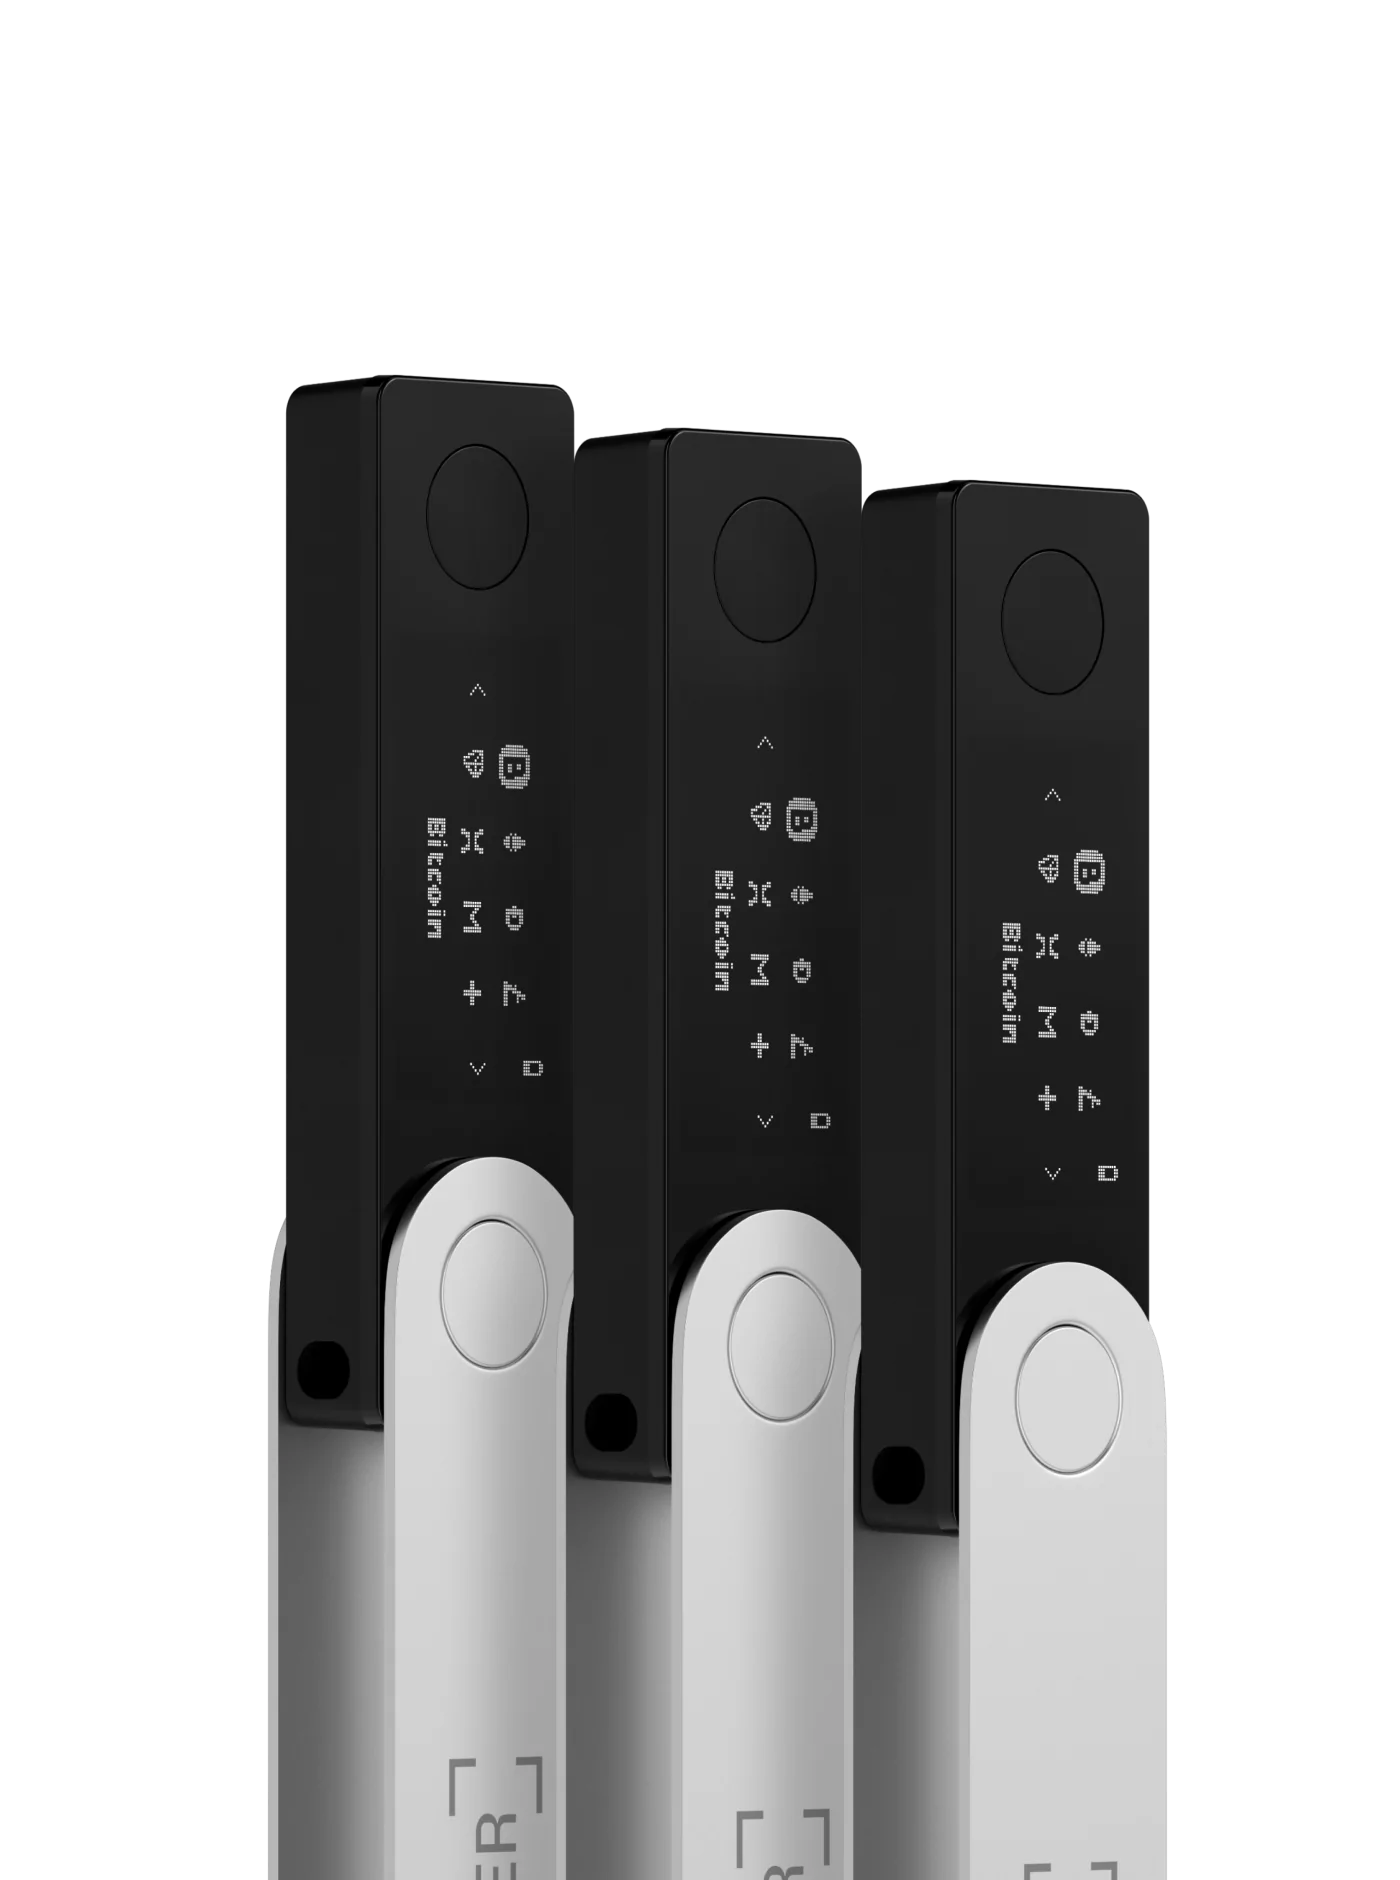 ledger wallet family pack - Most secure wallet available for crypto